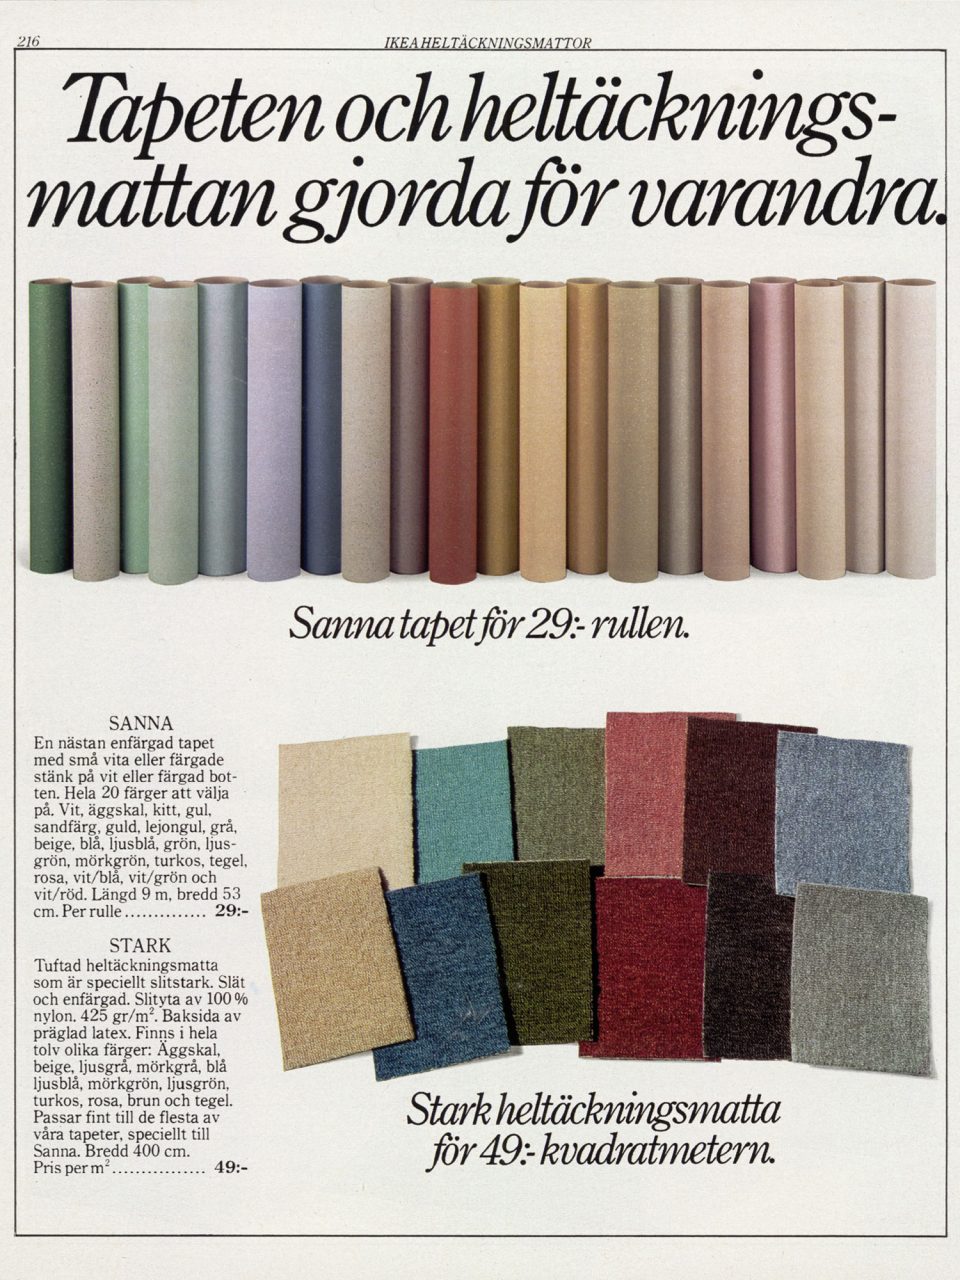 1982 IKEA catalogue page showing SANNA wallpaper rolls in pastel colours and STARK rug samples in dark tones.